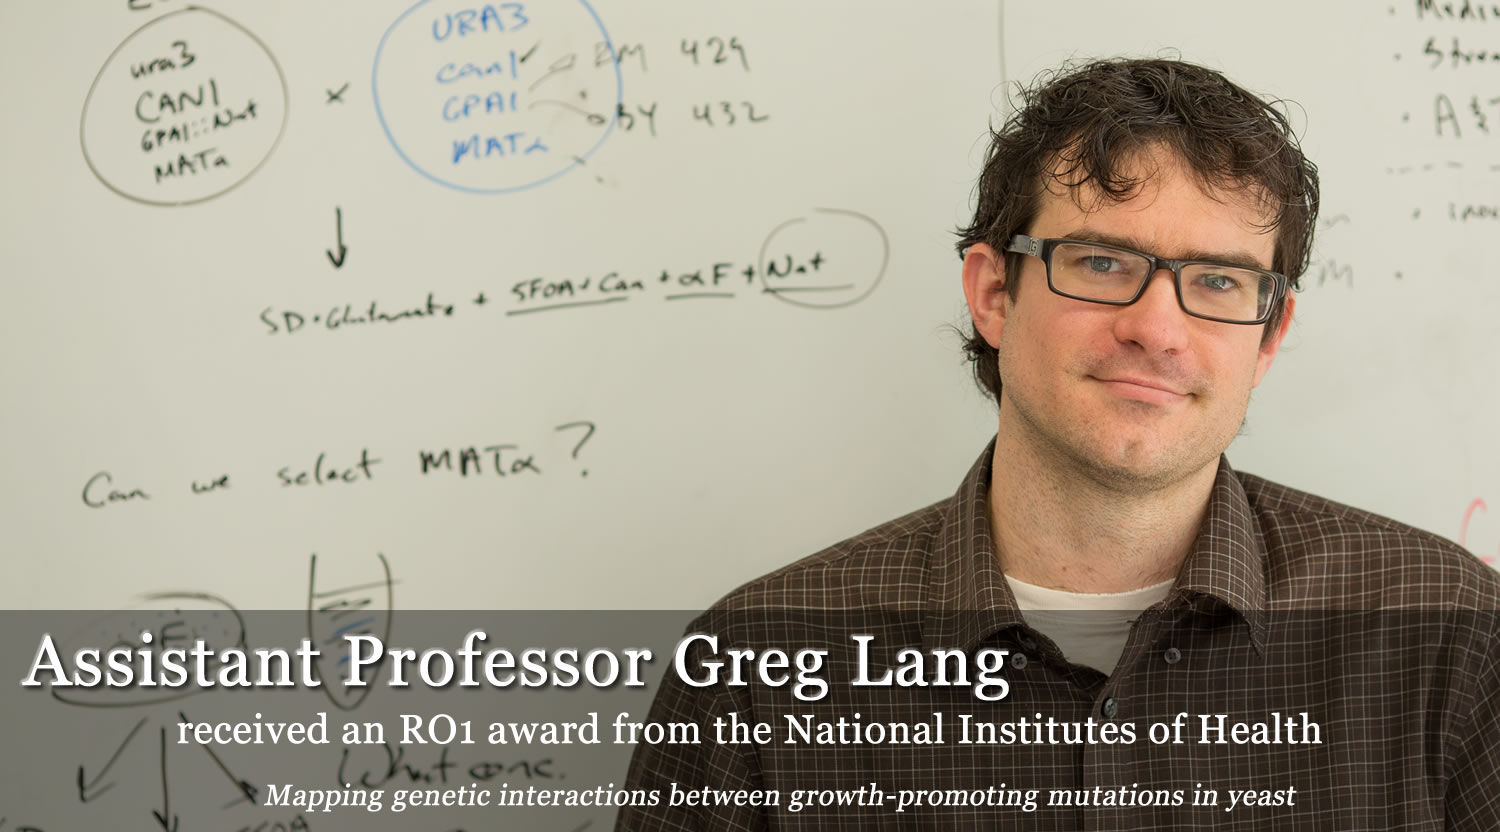 Greg Lang awarded an RO1 from NIH